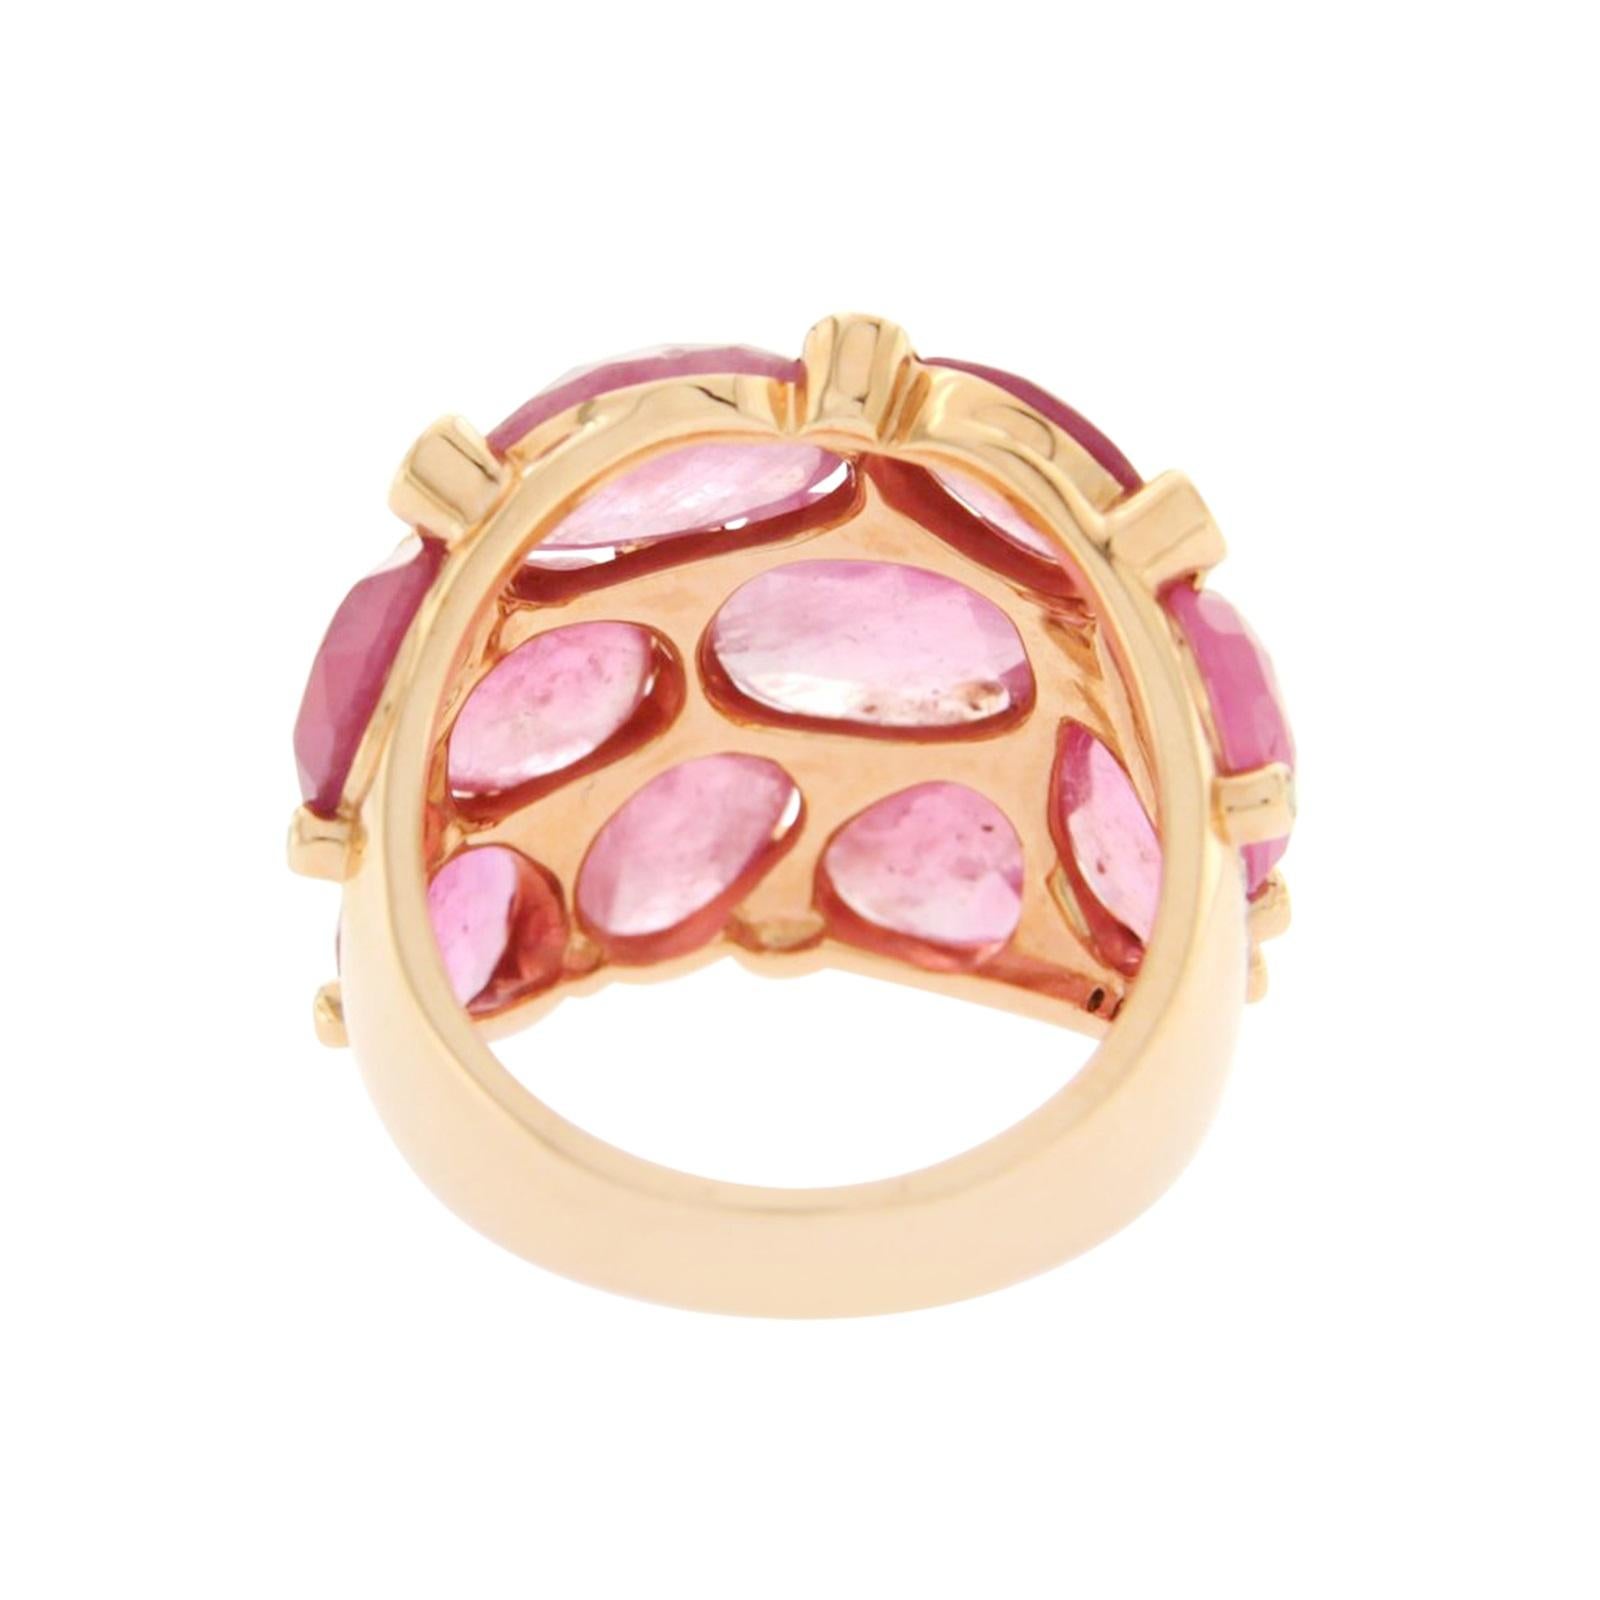 Type: Ring
Top: 22 mm
Band Width: 5 mm
Metal: Rose Gold
Metal Purity: 14K
Size:7
Hallmarks: 14K
Total Weight: 12.2 Grams
Stone Type: 0.42 Ct Diamonds VS2 G-F 13.80 CT Natural Pink Sapphire
Condition: New
Stock Number: N15